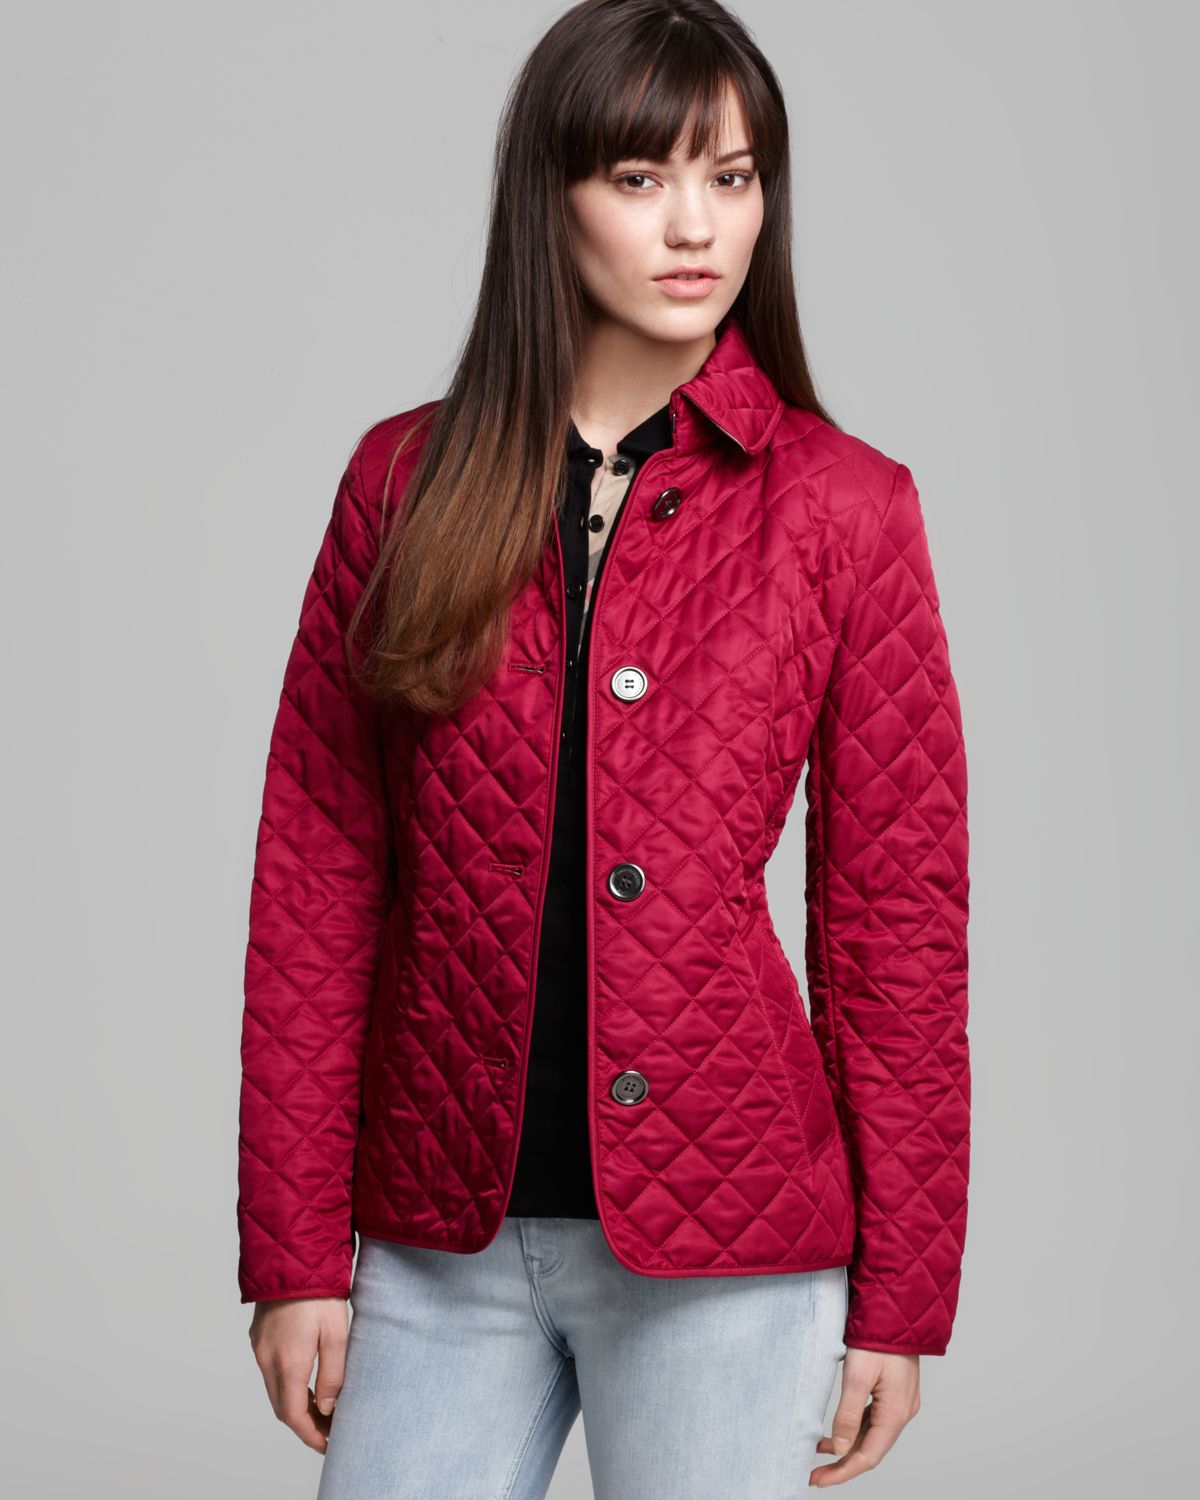 Burberry Brit Copford Quilted Jacket in 